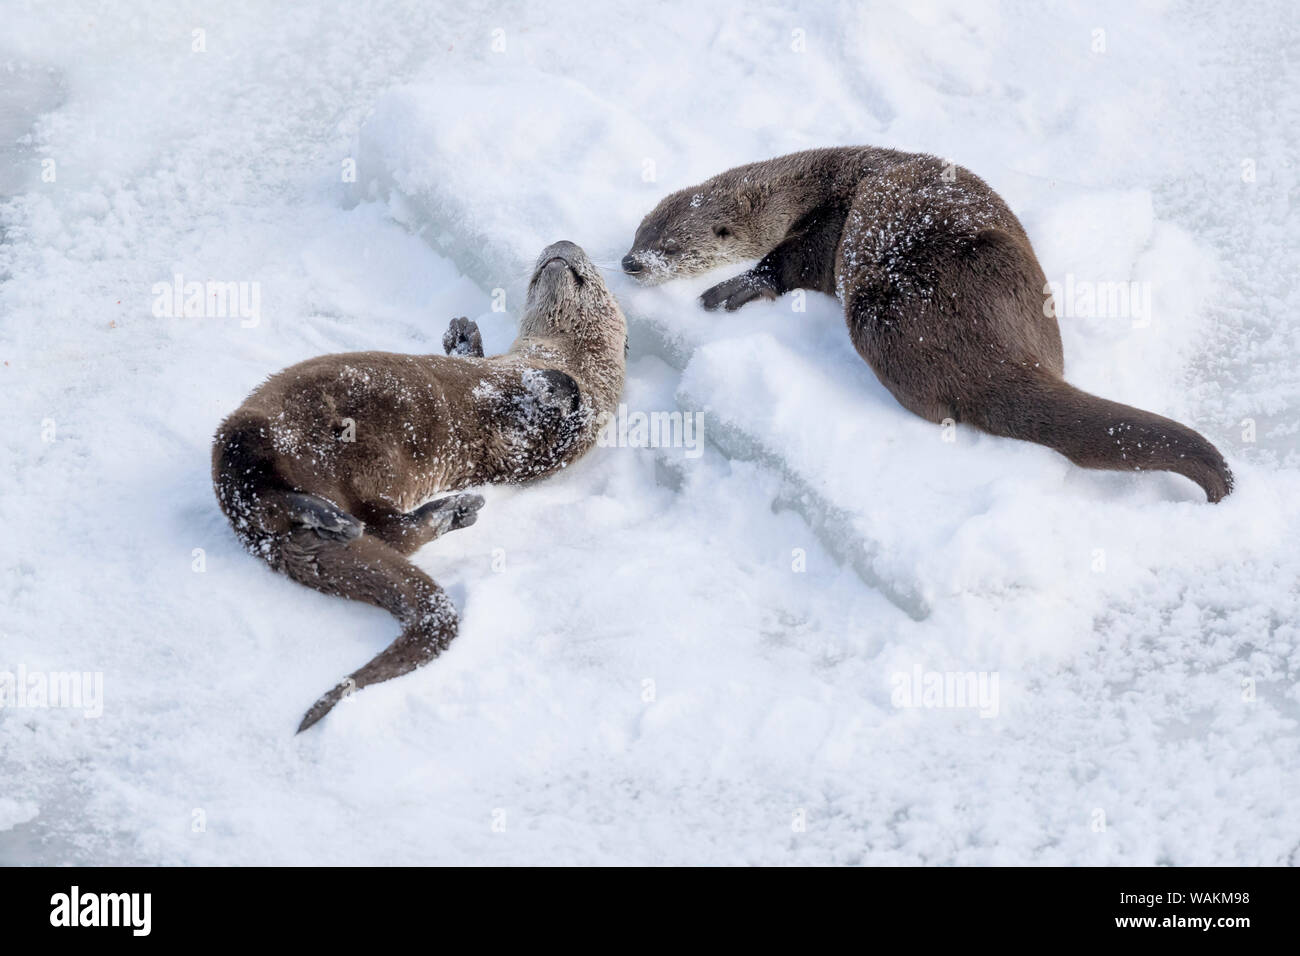 USA, Wyoming, Yellowstone National Park. One northern river otter rolling in the snow while another one looking on. Stock Photo